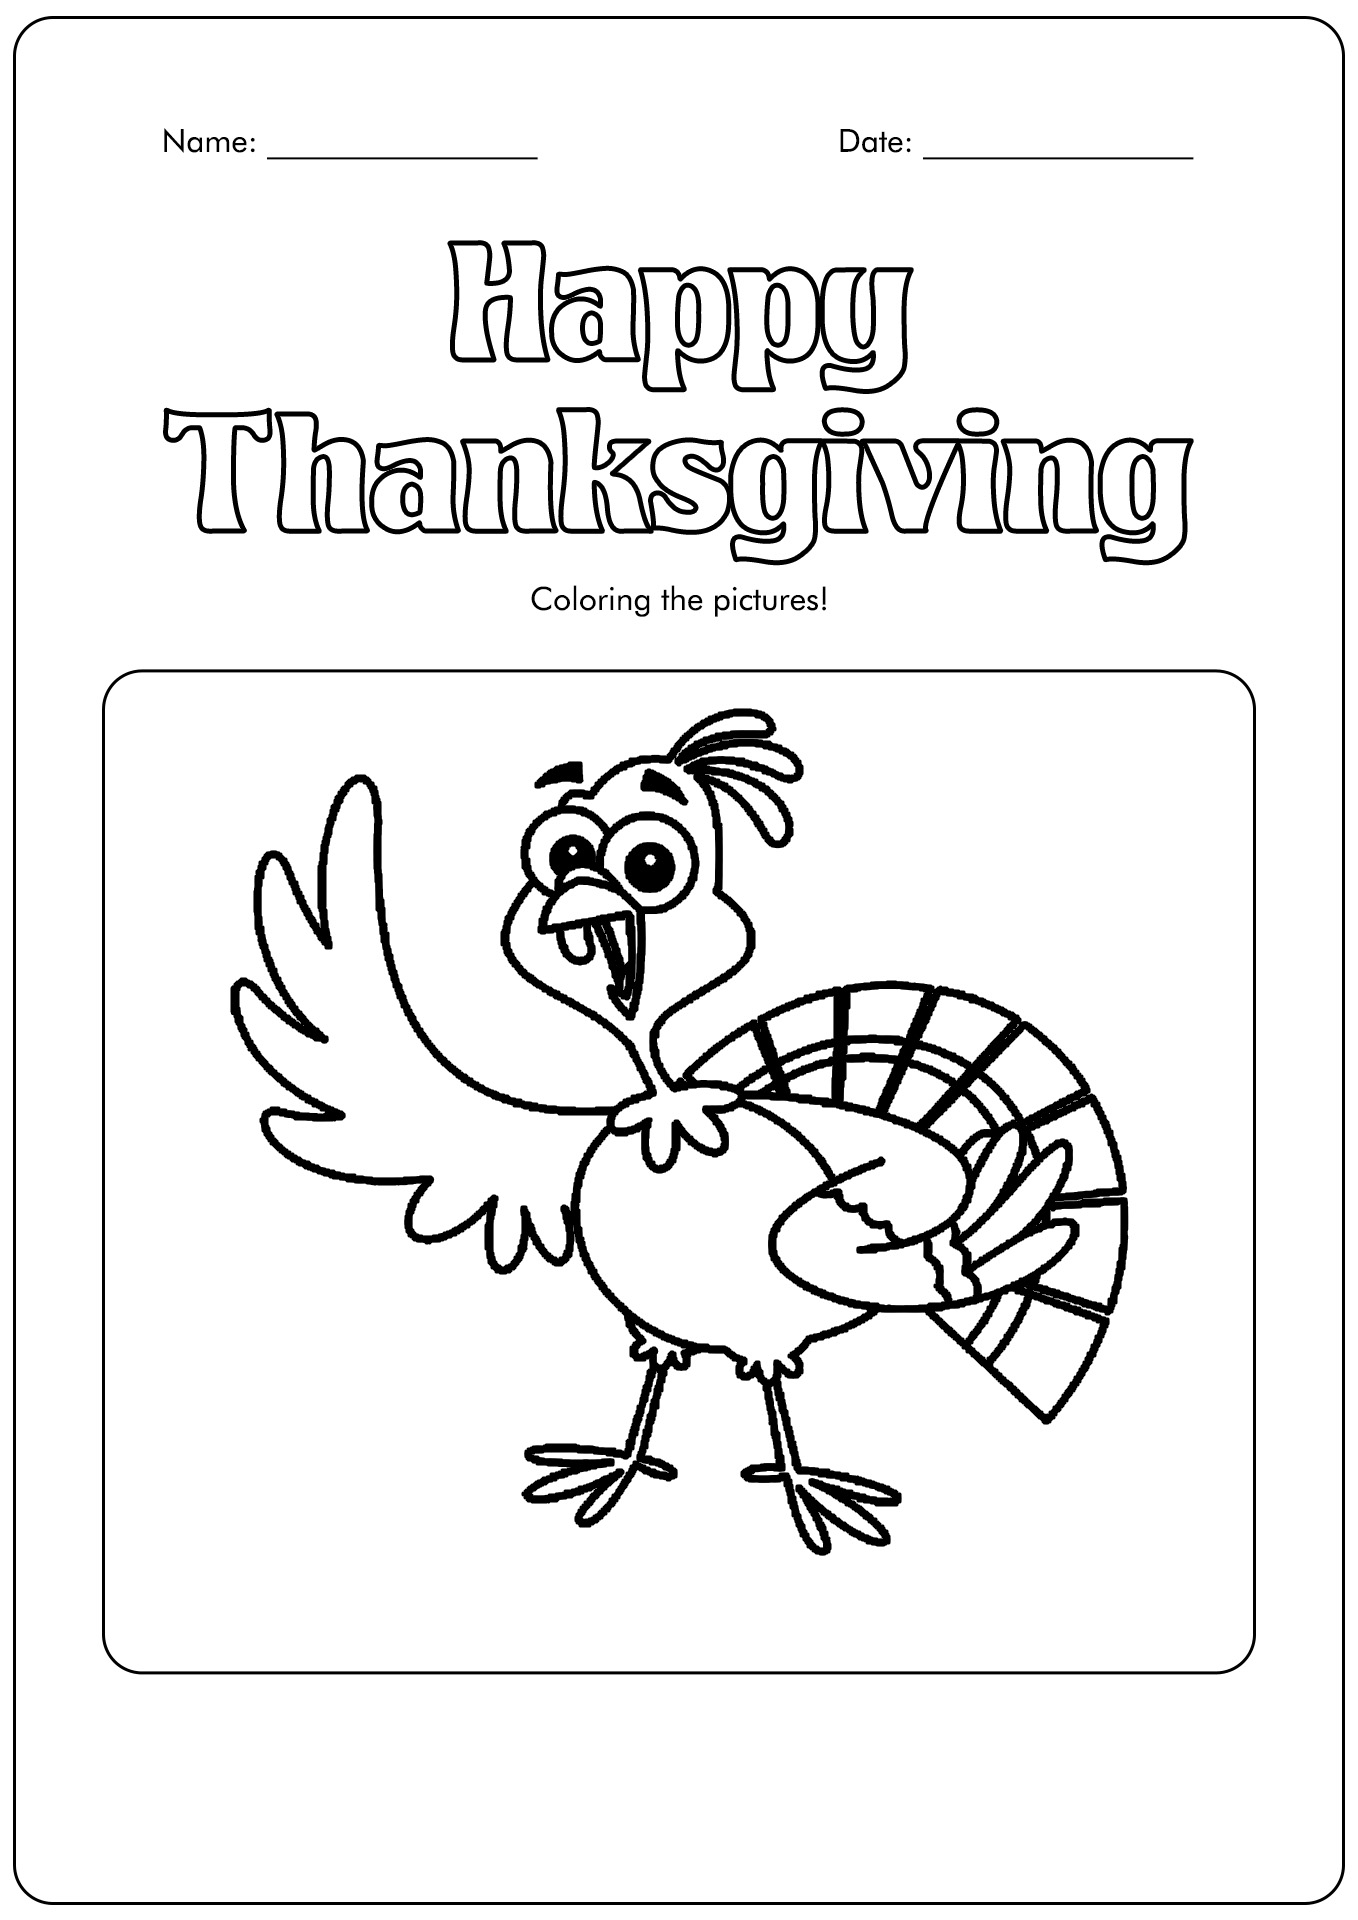 14 Best Images of Thanksgiving Number Worksheets - Free Math Addition